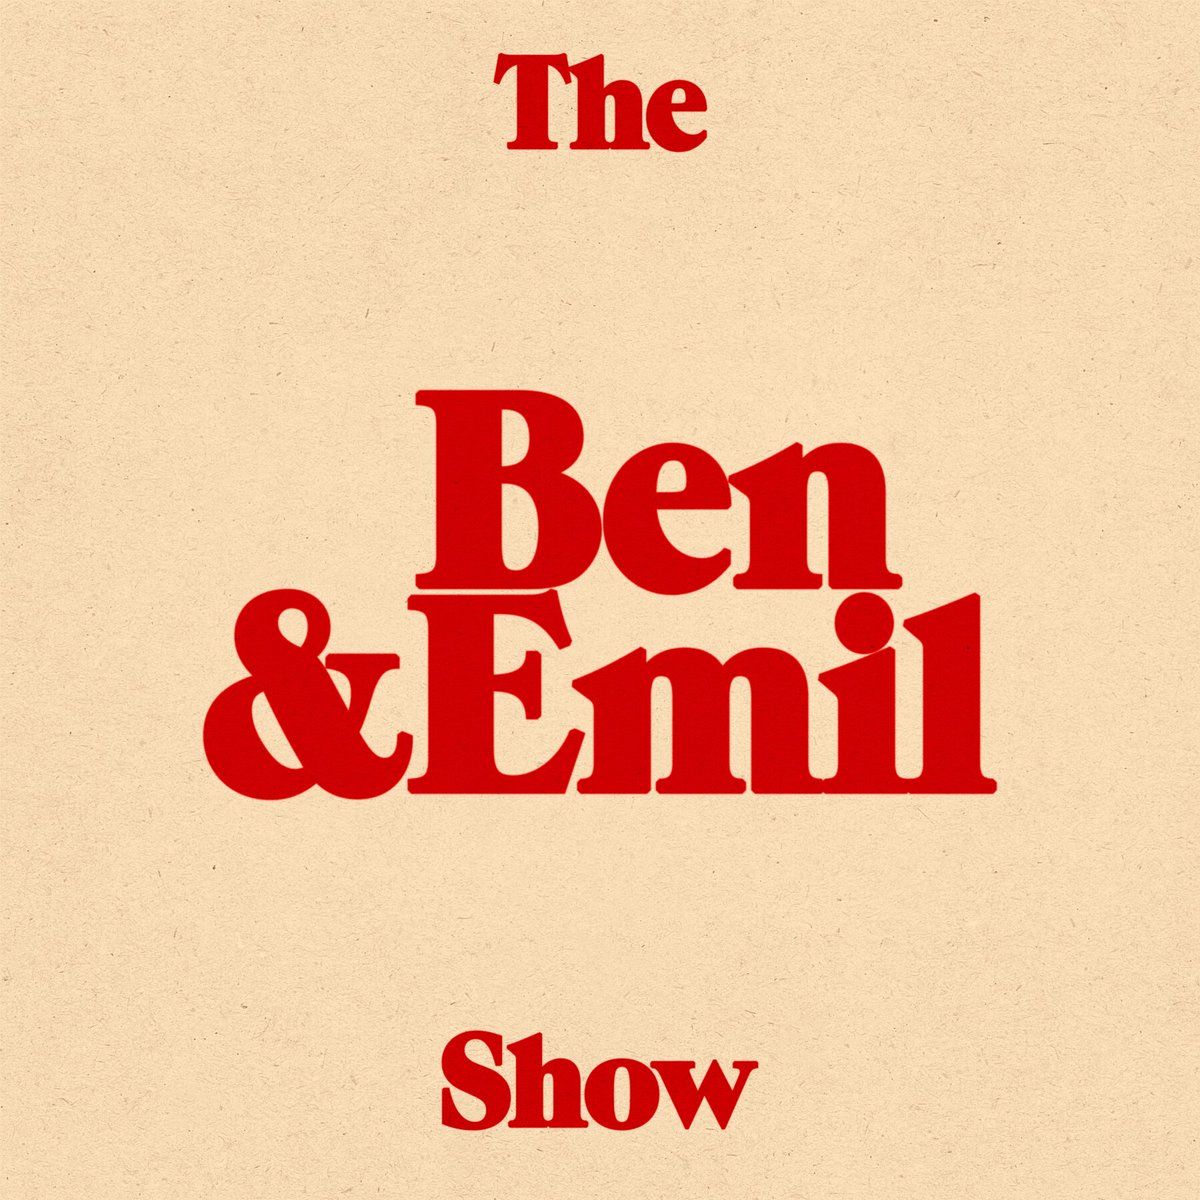 TONIGHT: Ben and Emil Live in Brooklyn is SOLD OUT! @Buncahn and @emilderosa make their triumphant return to Brooklyn in this edition of @benandemilshow Live! 7PM Doors ∙ 7:30PM Show Details: tinyurl.com/29xjm378